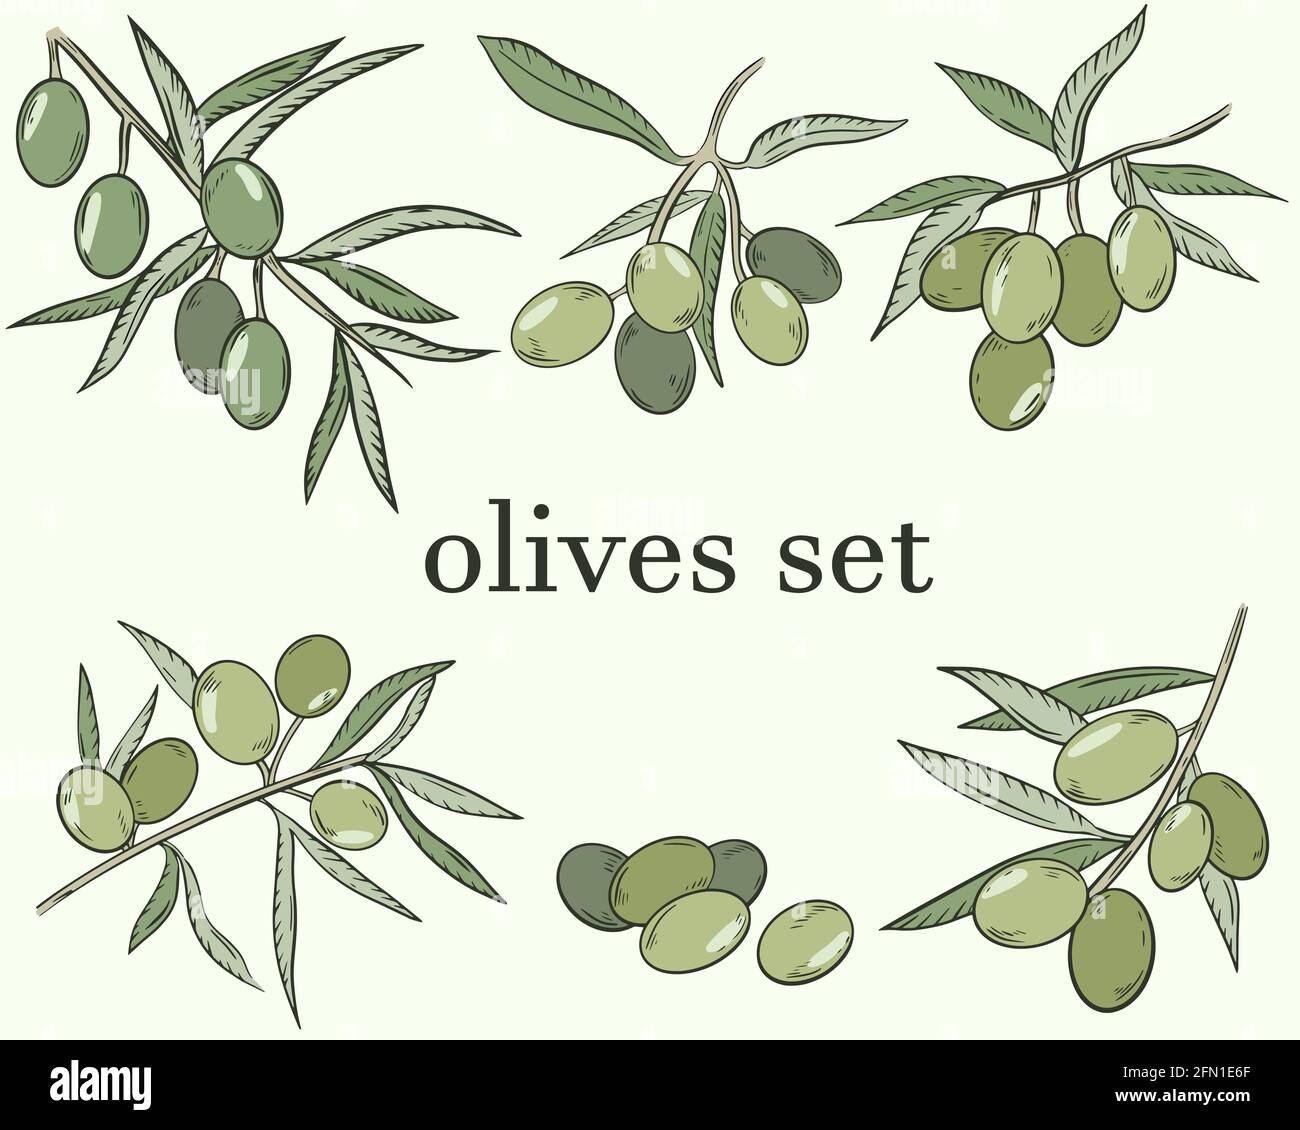 Sketch of olives. Vector. A set of olives, berries on a branch. The fruits of the olive tree. Color illustration, hand-drawing. Stock Vector